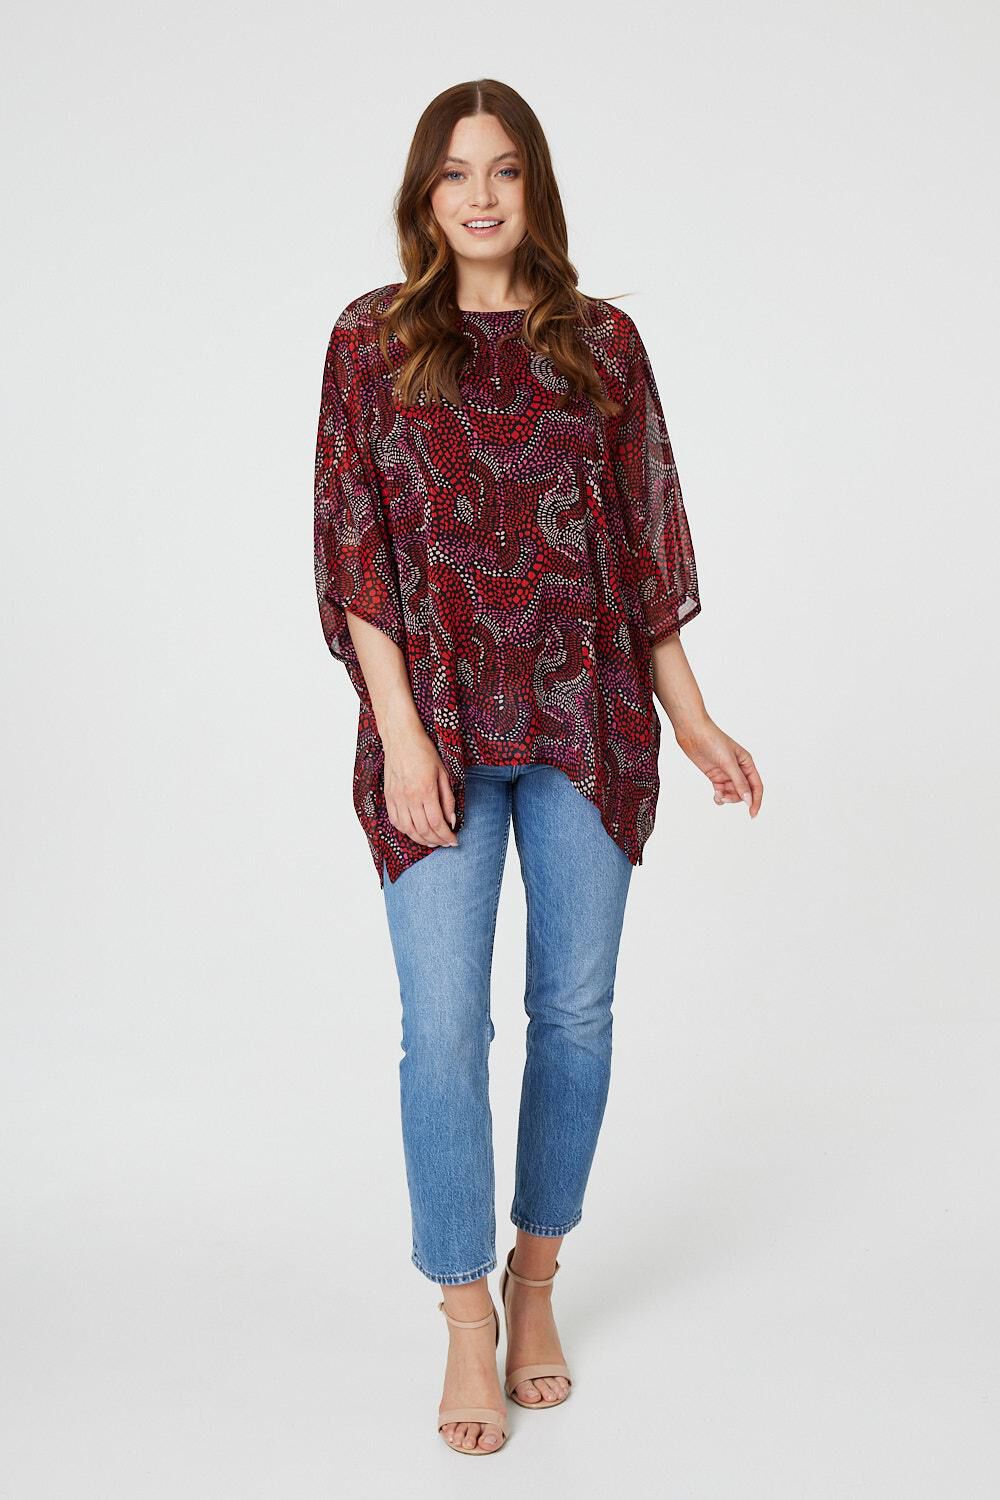 Izabel London Red - Printed 3/4 Sleeve Oversized Top, Size: 12